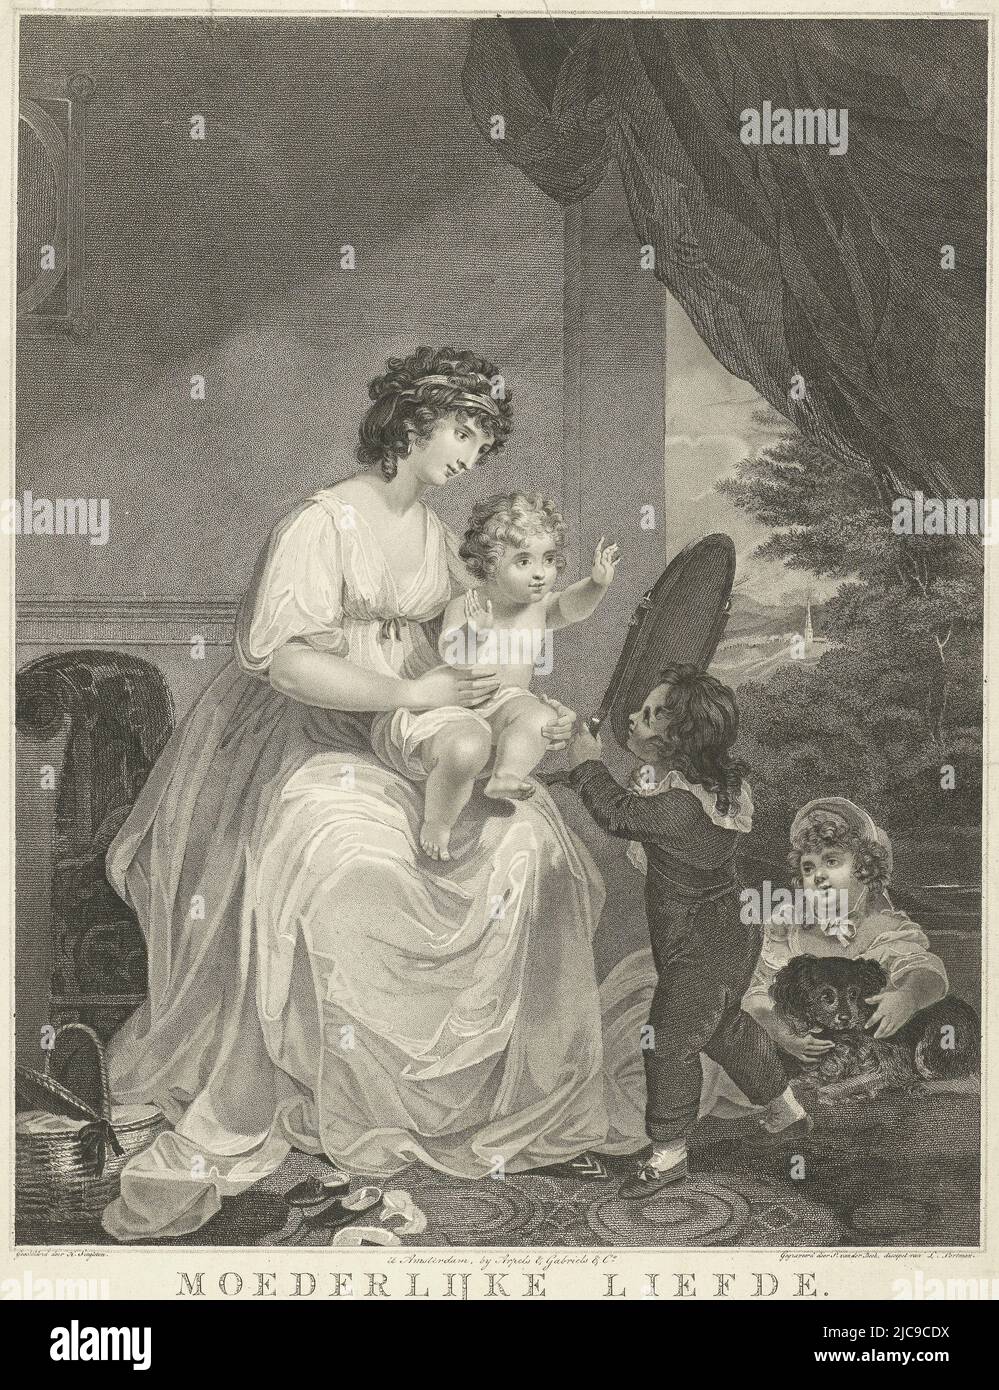 Mother with Three Children in Interior Motherly Love , print maker: Pieter van der Beek, (mentioned on object), after: Henry Singleton, (mentioned on object), publisher: Arpels & Gabriels & Co., (mentioned on object), Amsterdam, 1800 - 1821, paper, etching, h 515 mm × w 376 mm Stock Photo